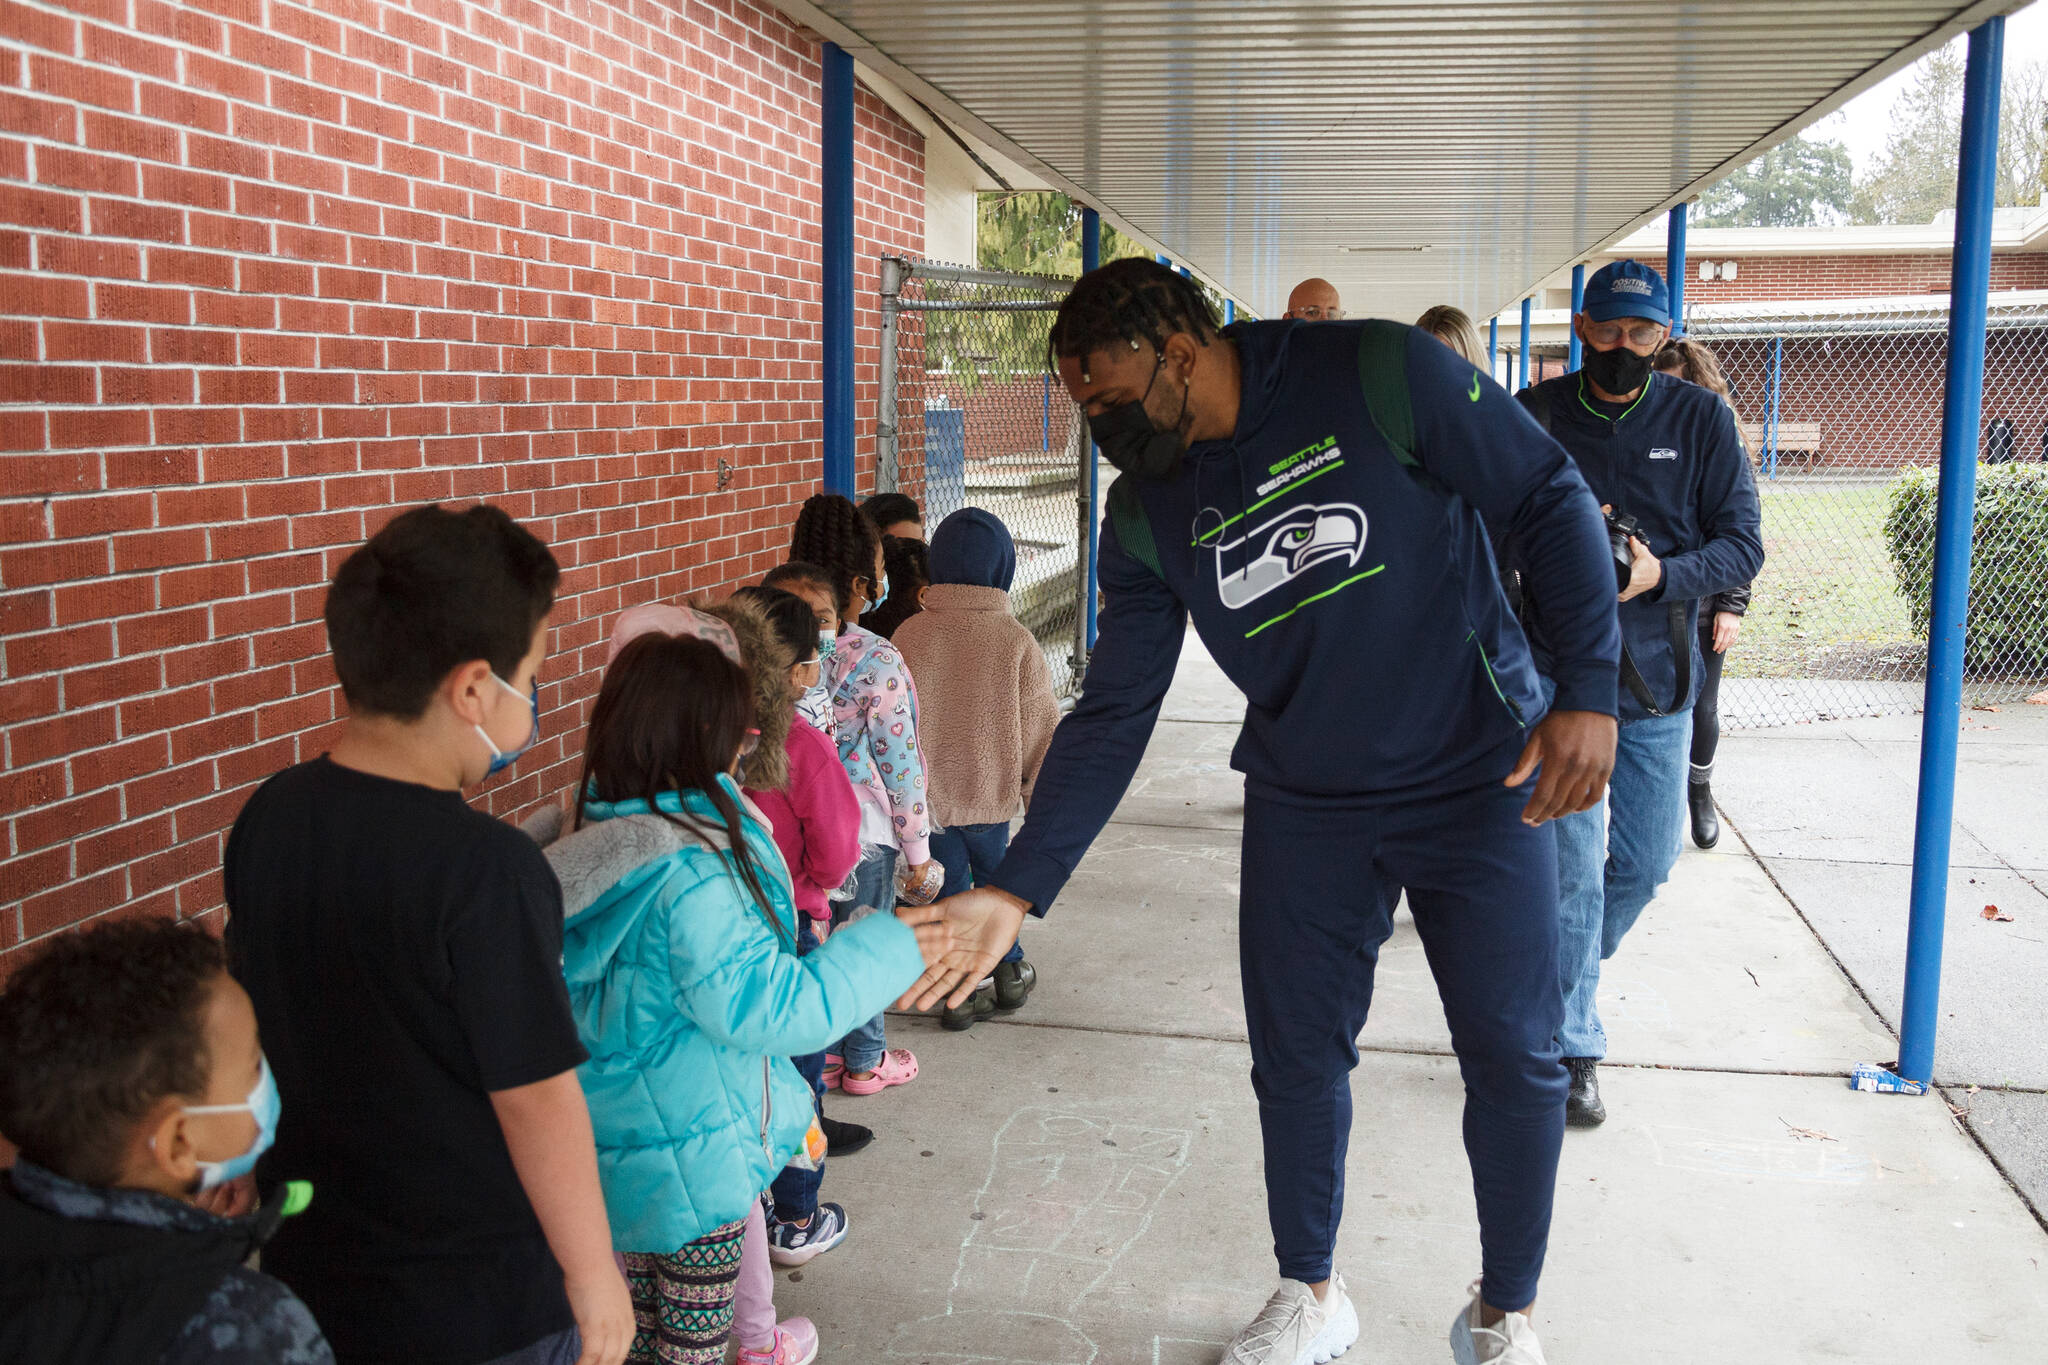 Photo by Henry-Stewart-Wood
Seahawks linebacker Jordyn Brooks high-fives kids at Chinook Elementary School on their way to class on Tuesday, Mar. 8, 2022.